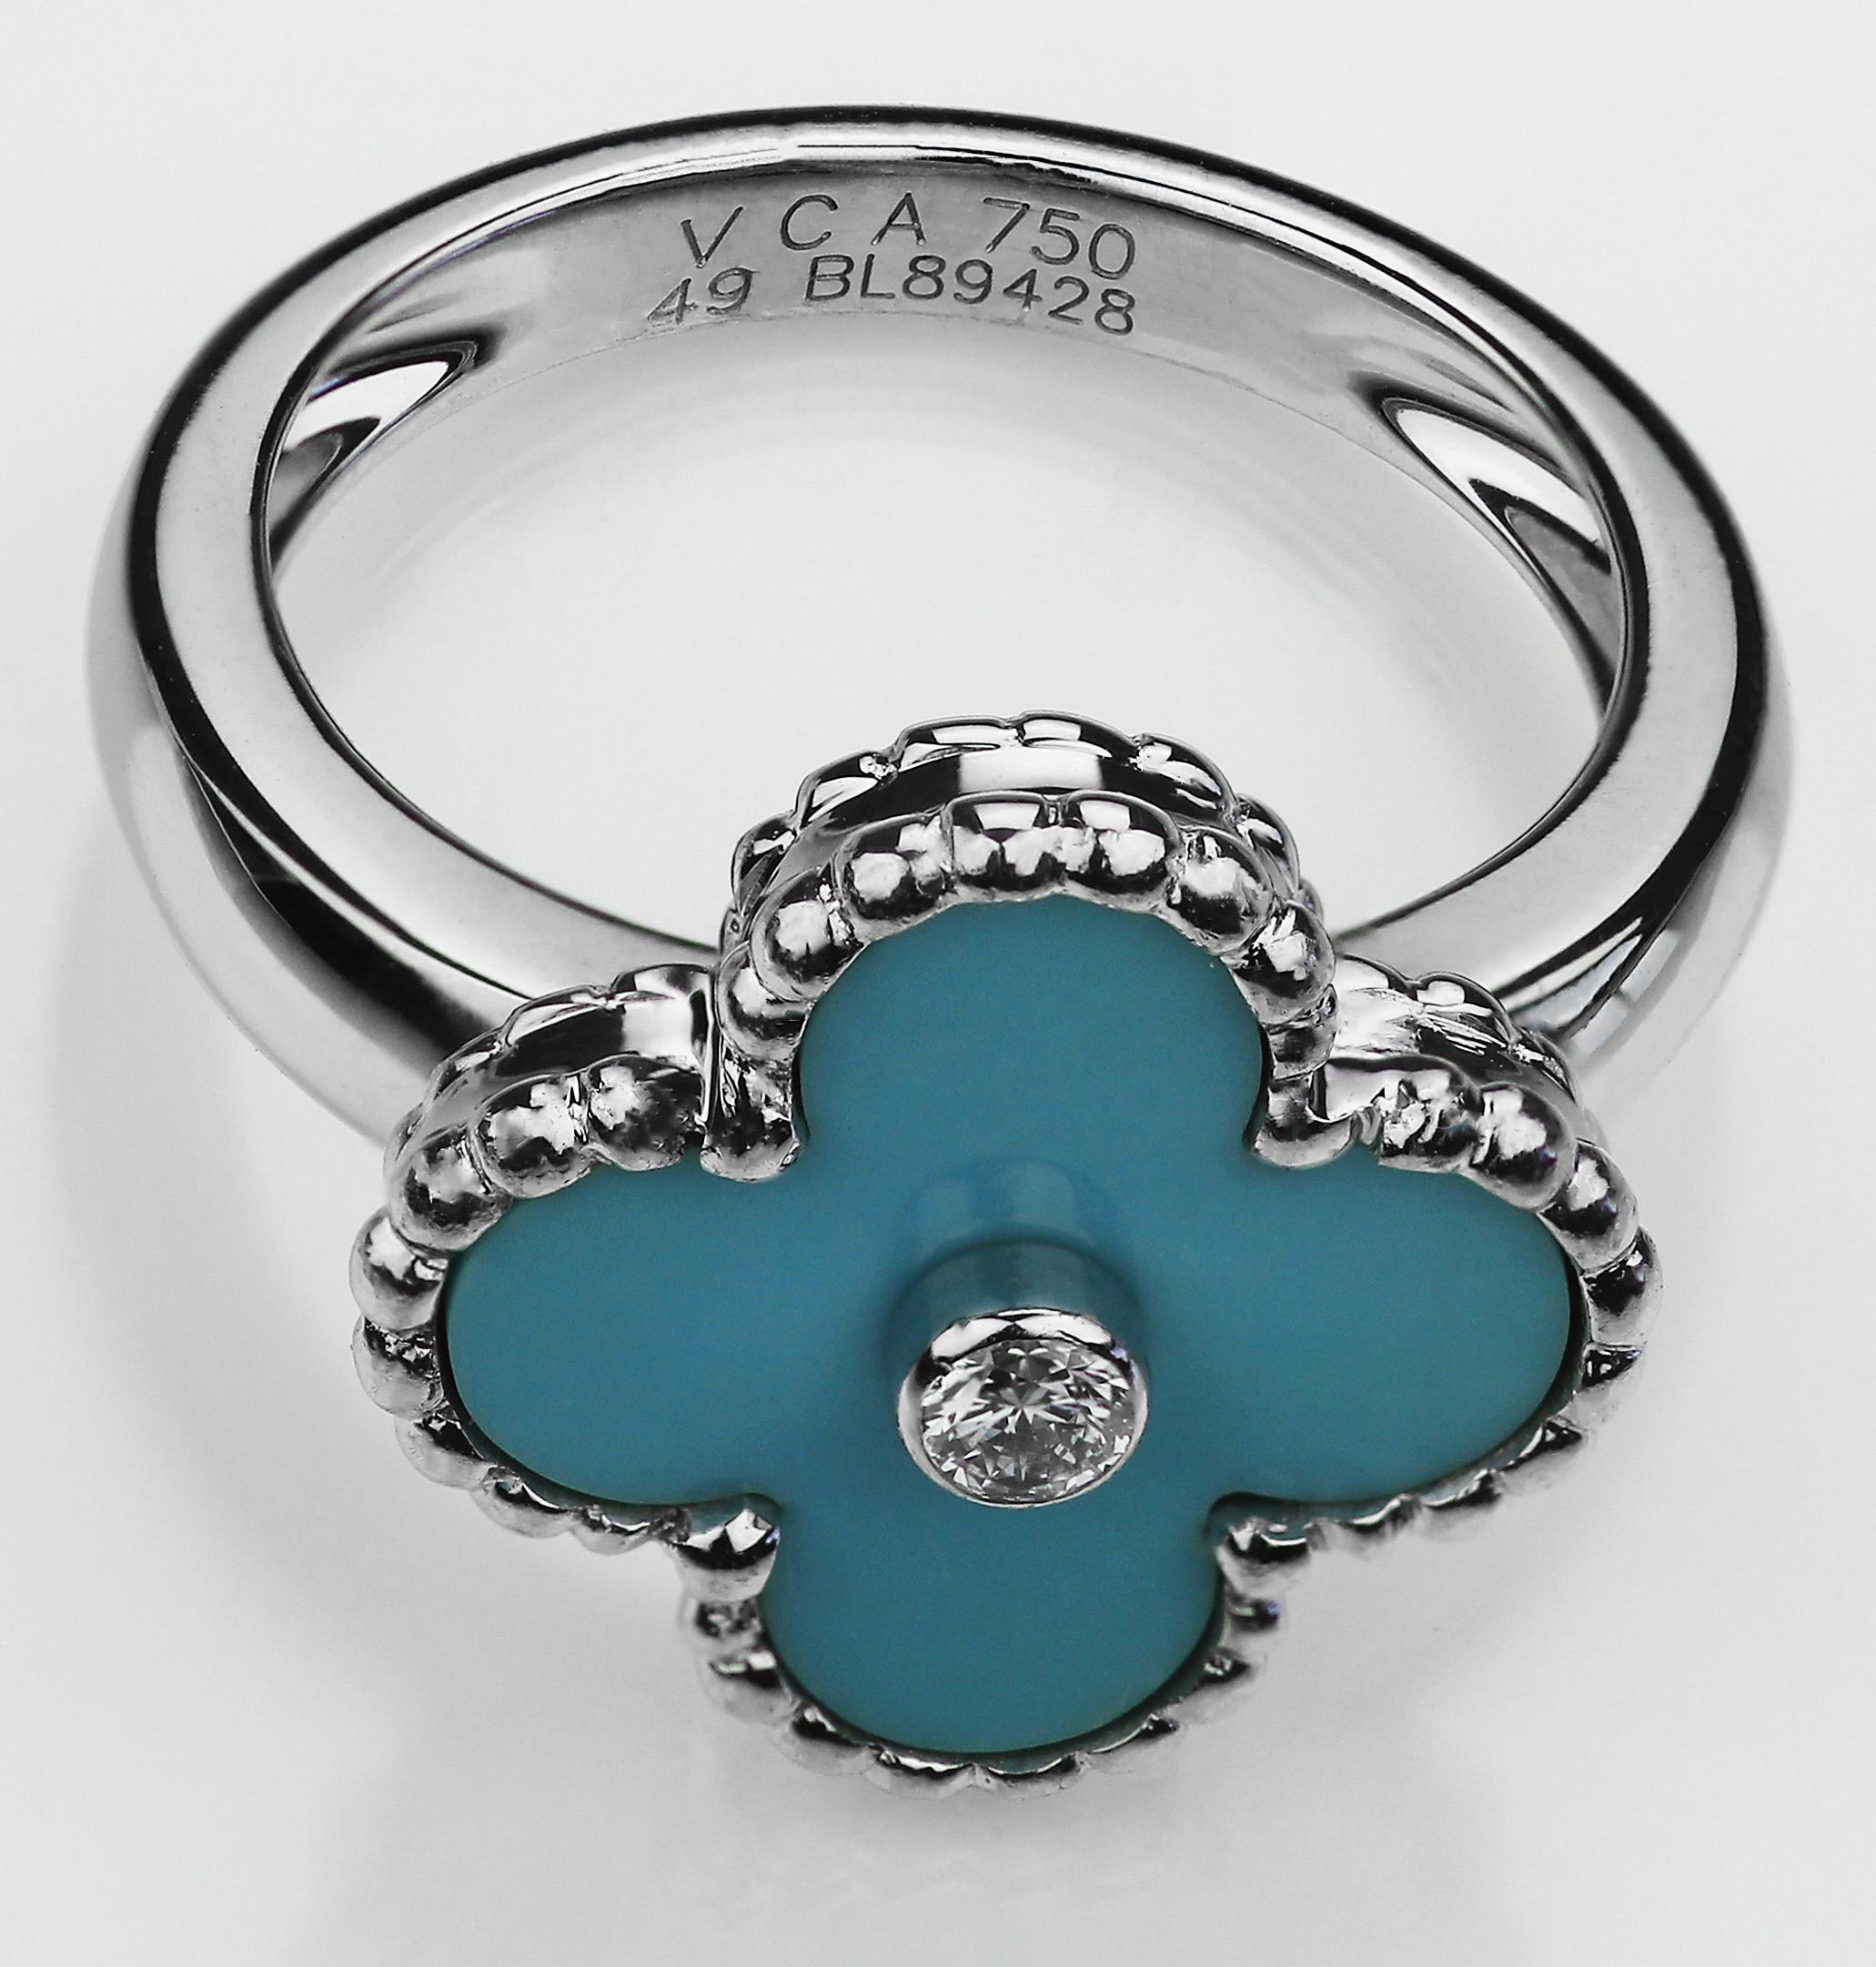 Retro Van Cleef & Arpels VCA Vintage Alhambra ring with Turquoise and Diamond Retaired